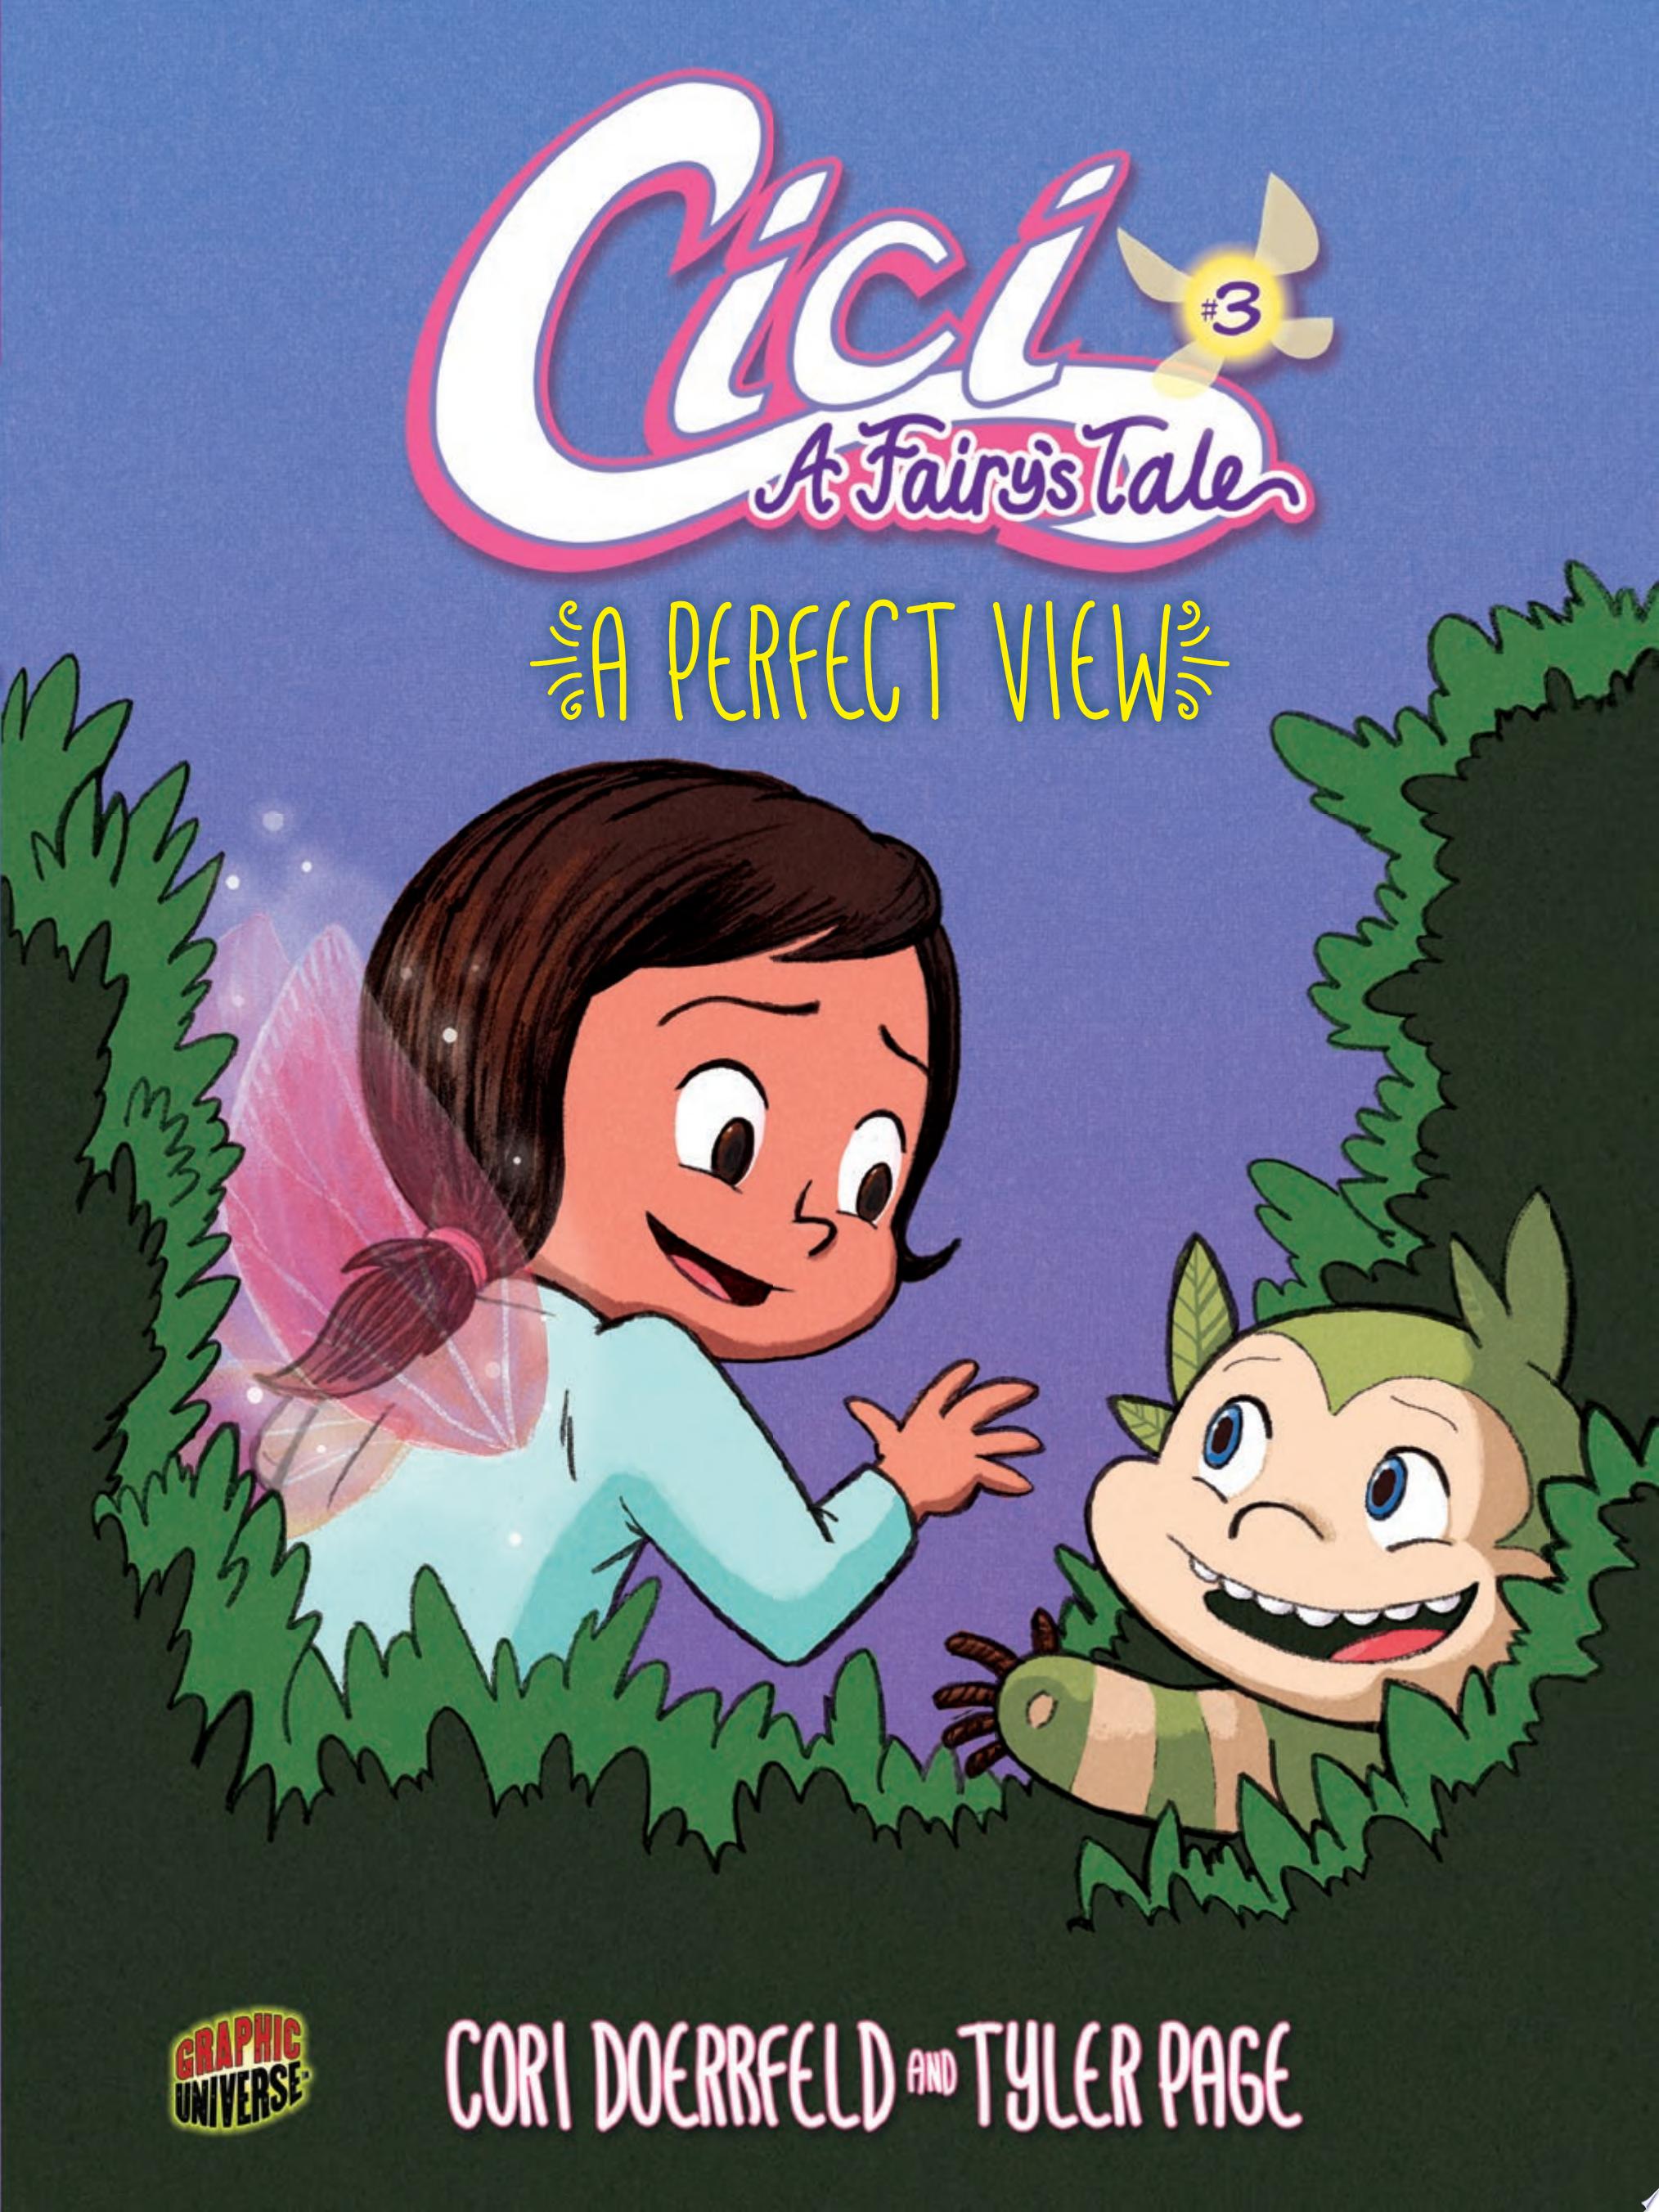 Image for "Cici: A Fairy's Tale: A Perfect View"